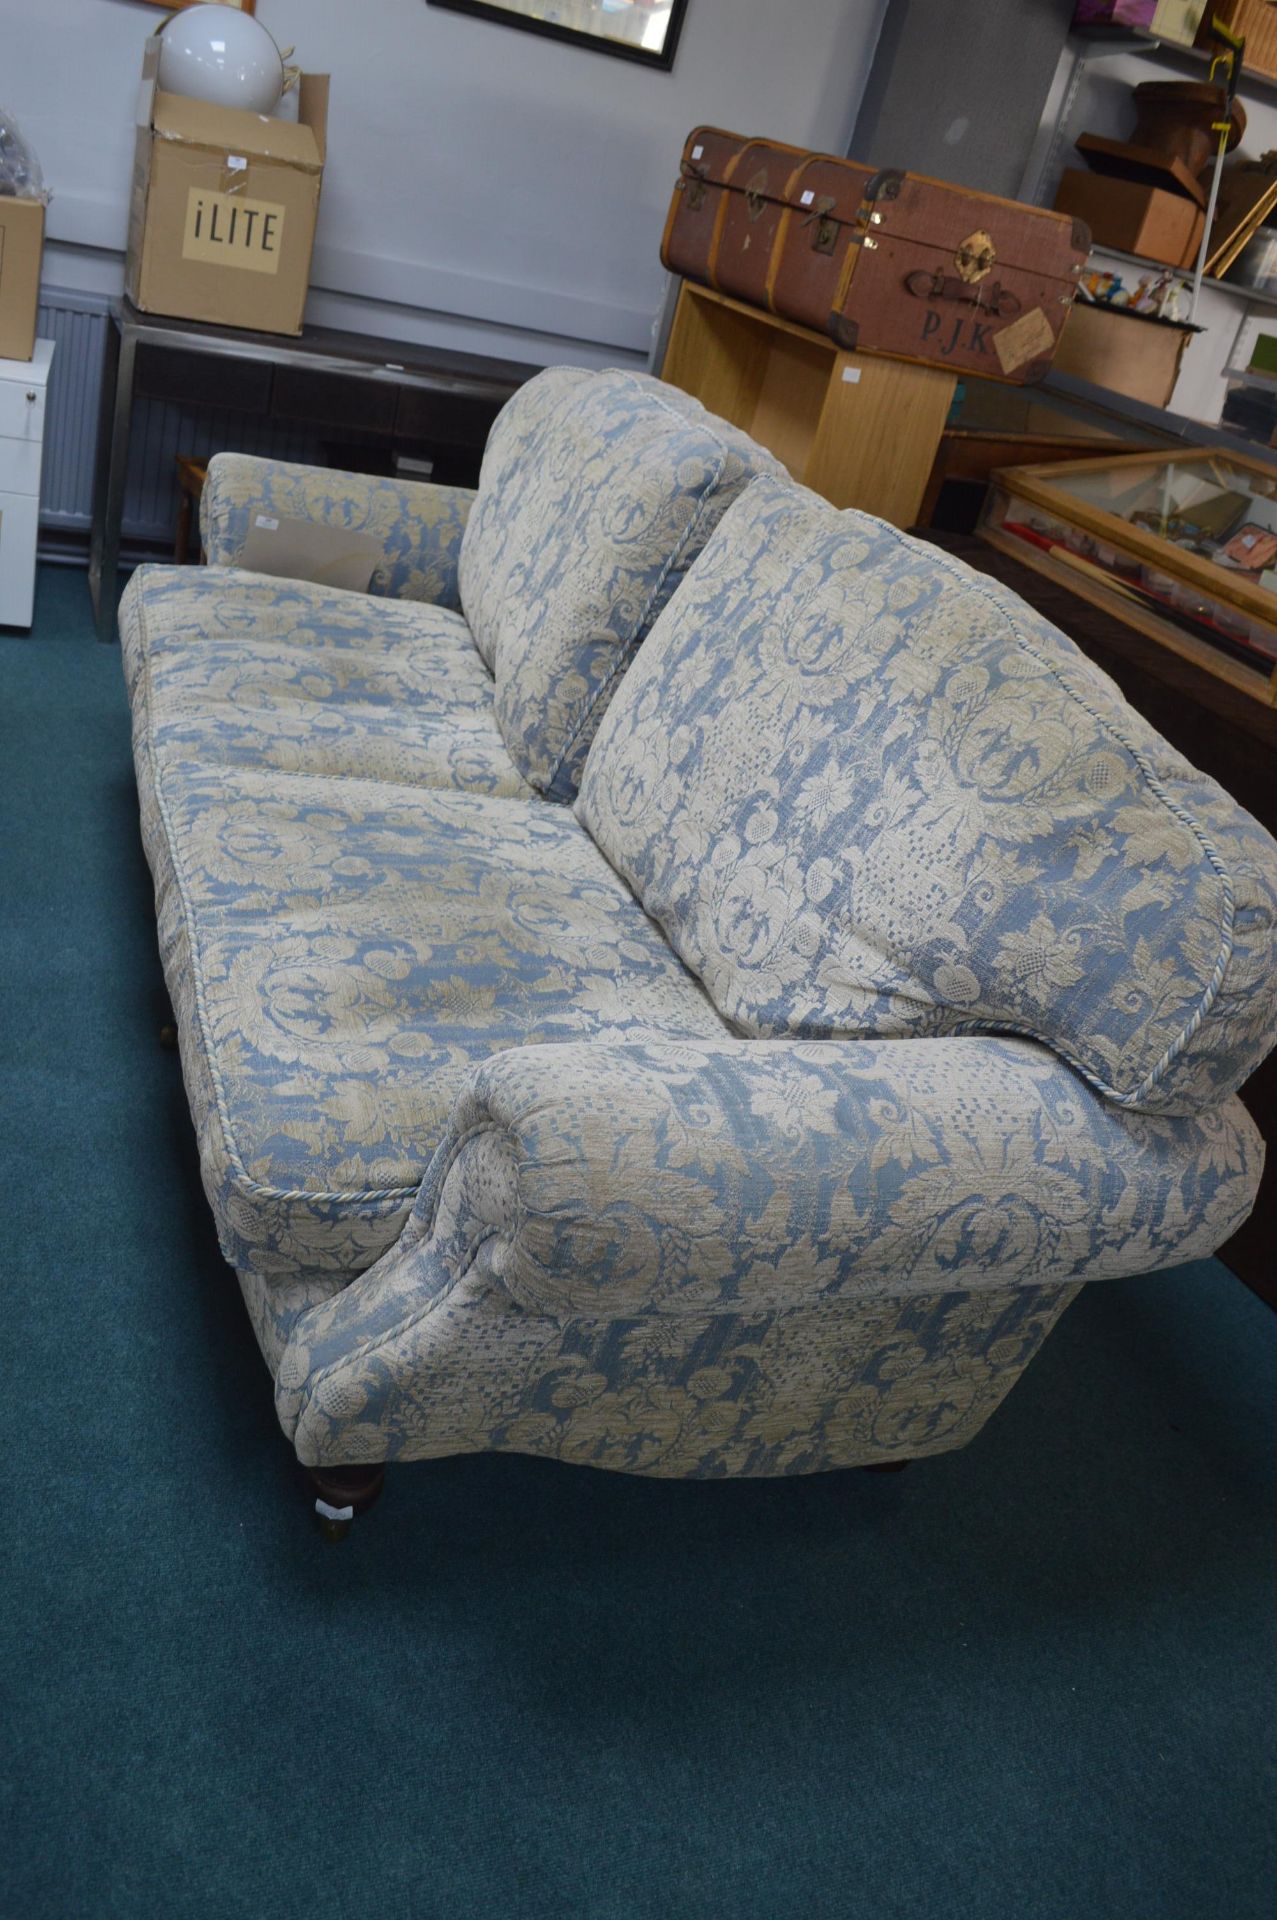 Large Two Seat Sofa in Blue Upholstery - Image 2 of 2